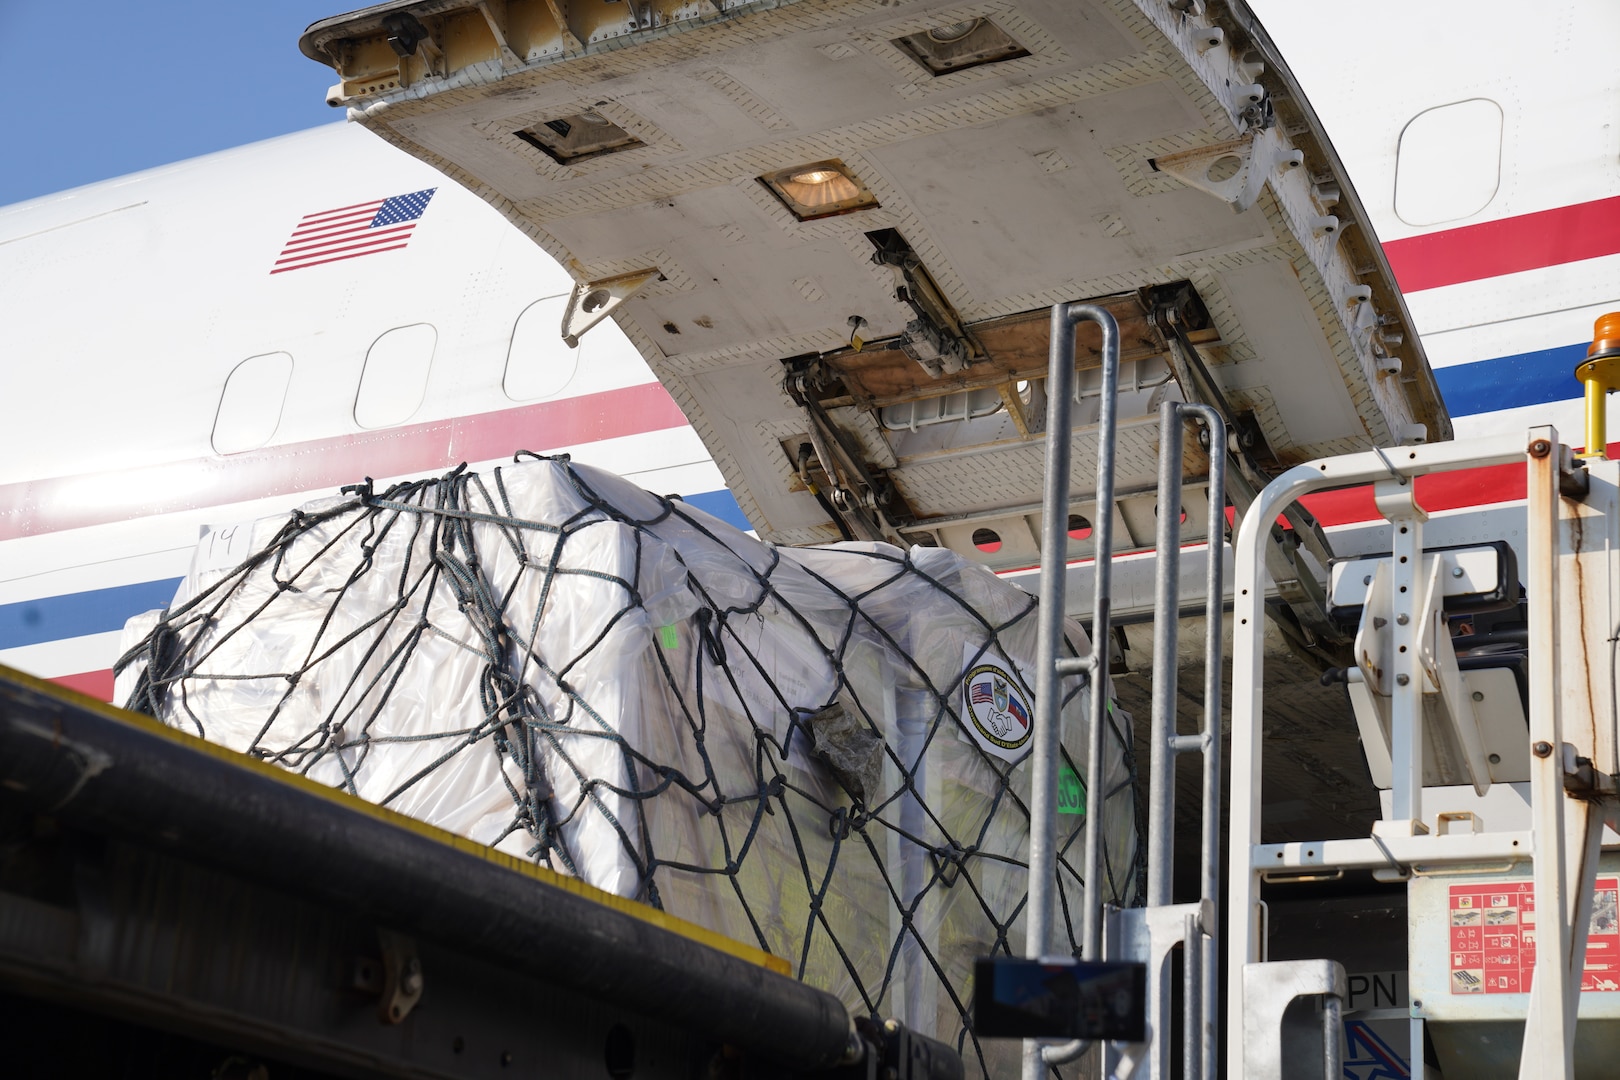 A shipment of 300,000 packets of Oral Rehydration Solution (ORS), donated by U.S. Southern Command (SOUTHCOM), is loaded onto an Amerijet cargo plane for transit to Haiti.